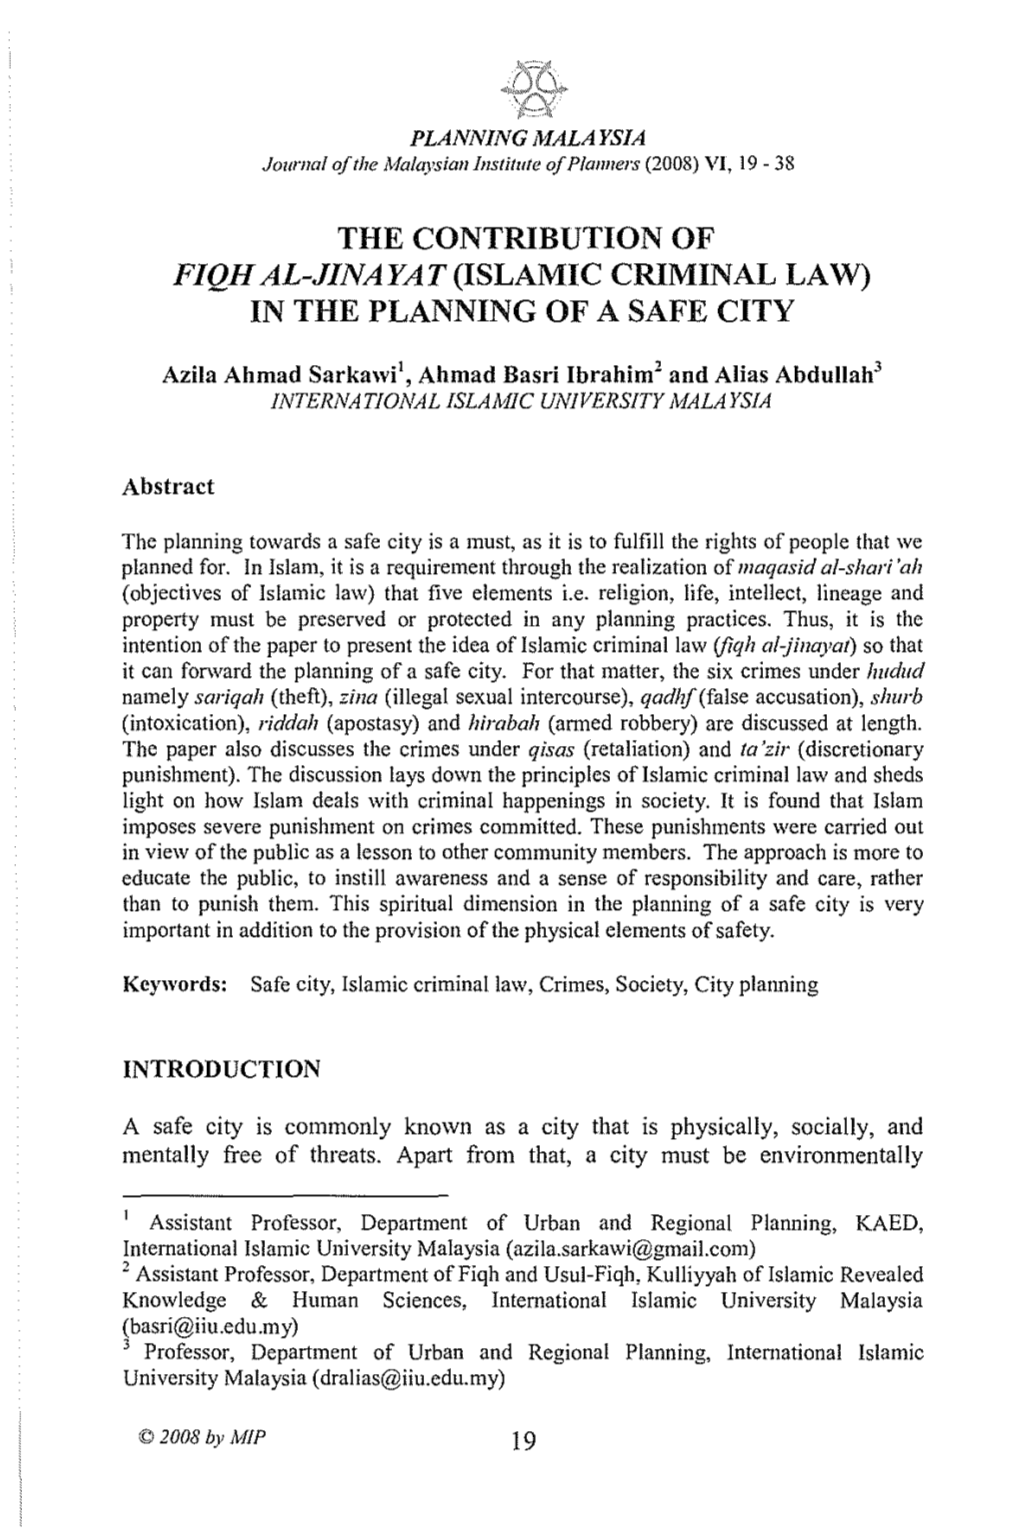 The Contribution of Fiqh Al-Jinayat (Islamic Criminal Law) in the Planning of a Safe City